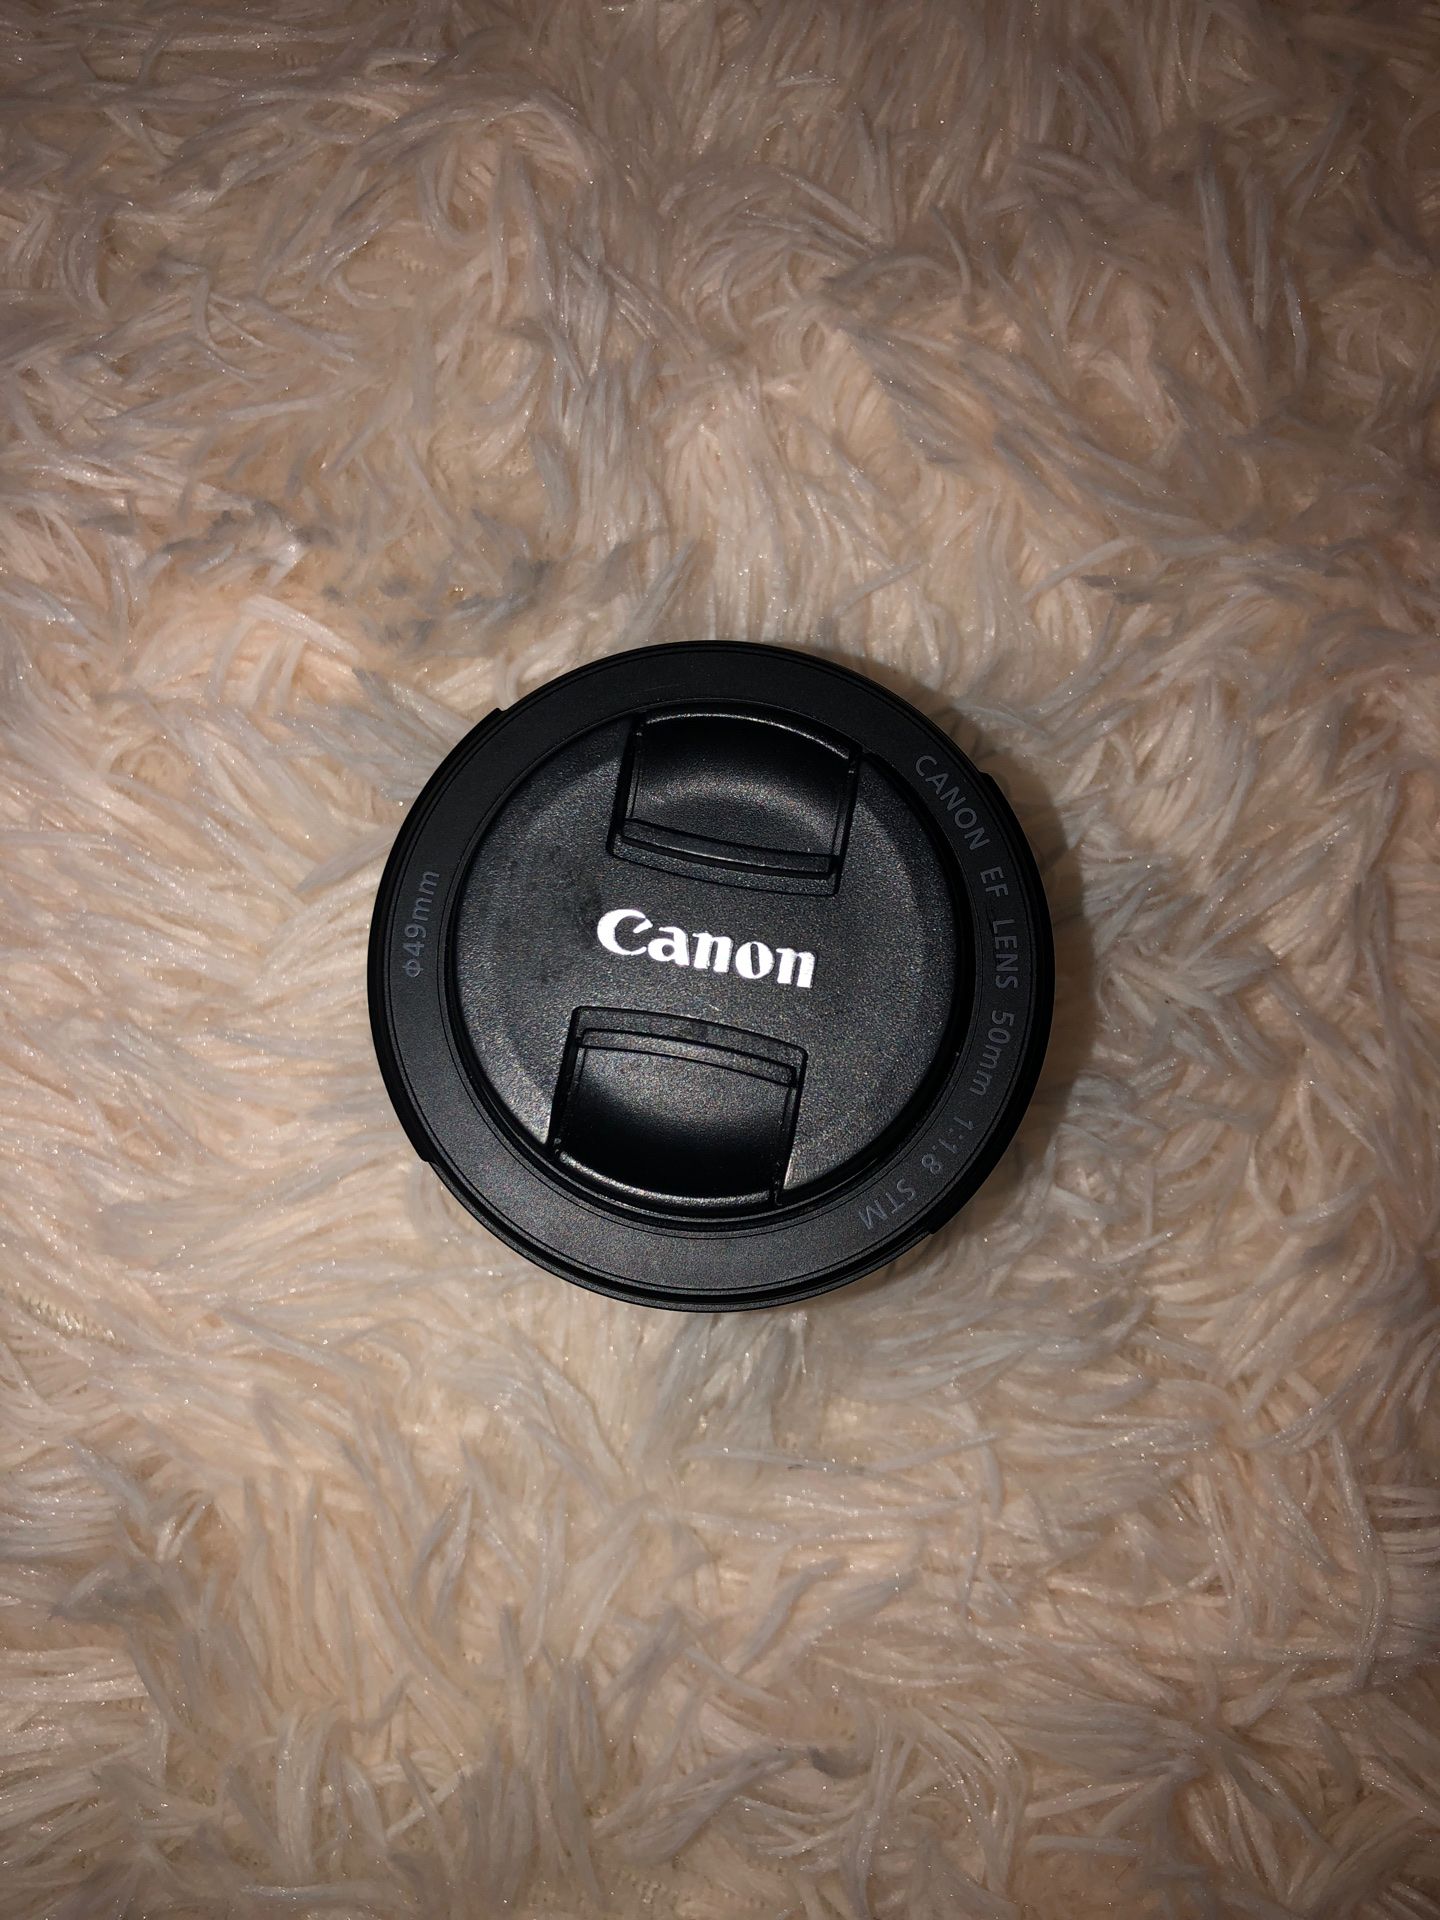 50mm f1.8 lens for Canon